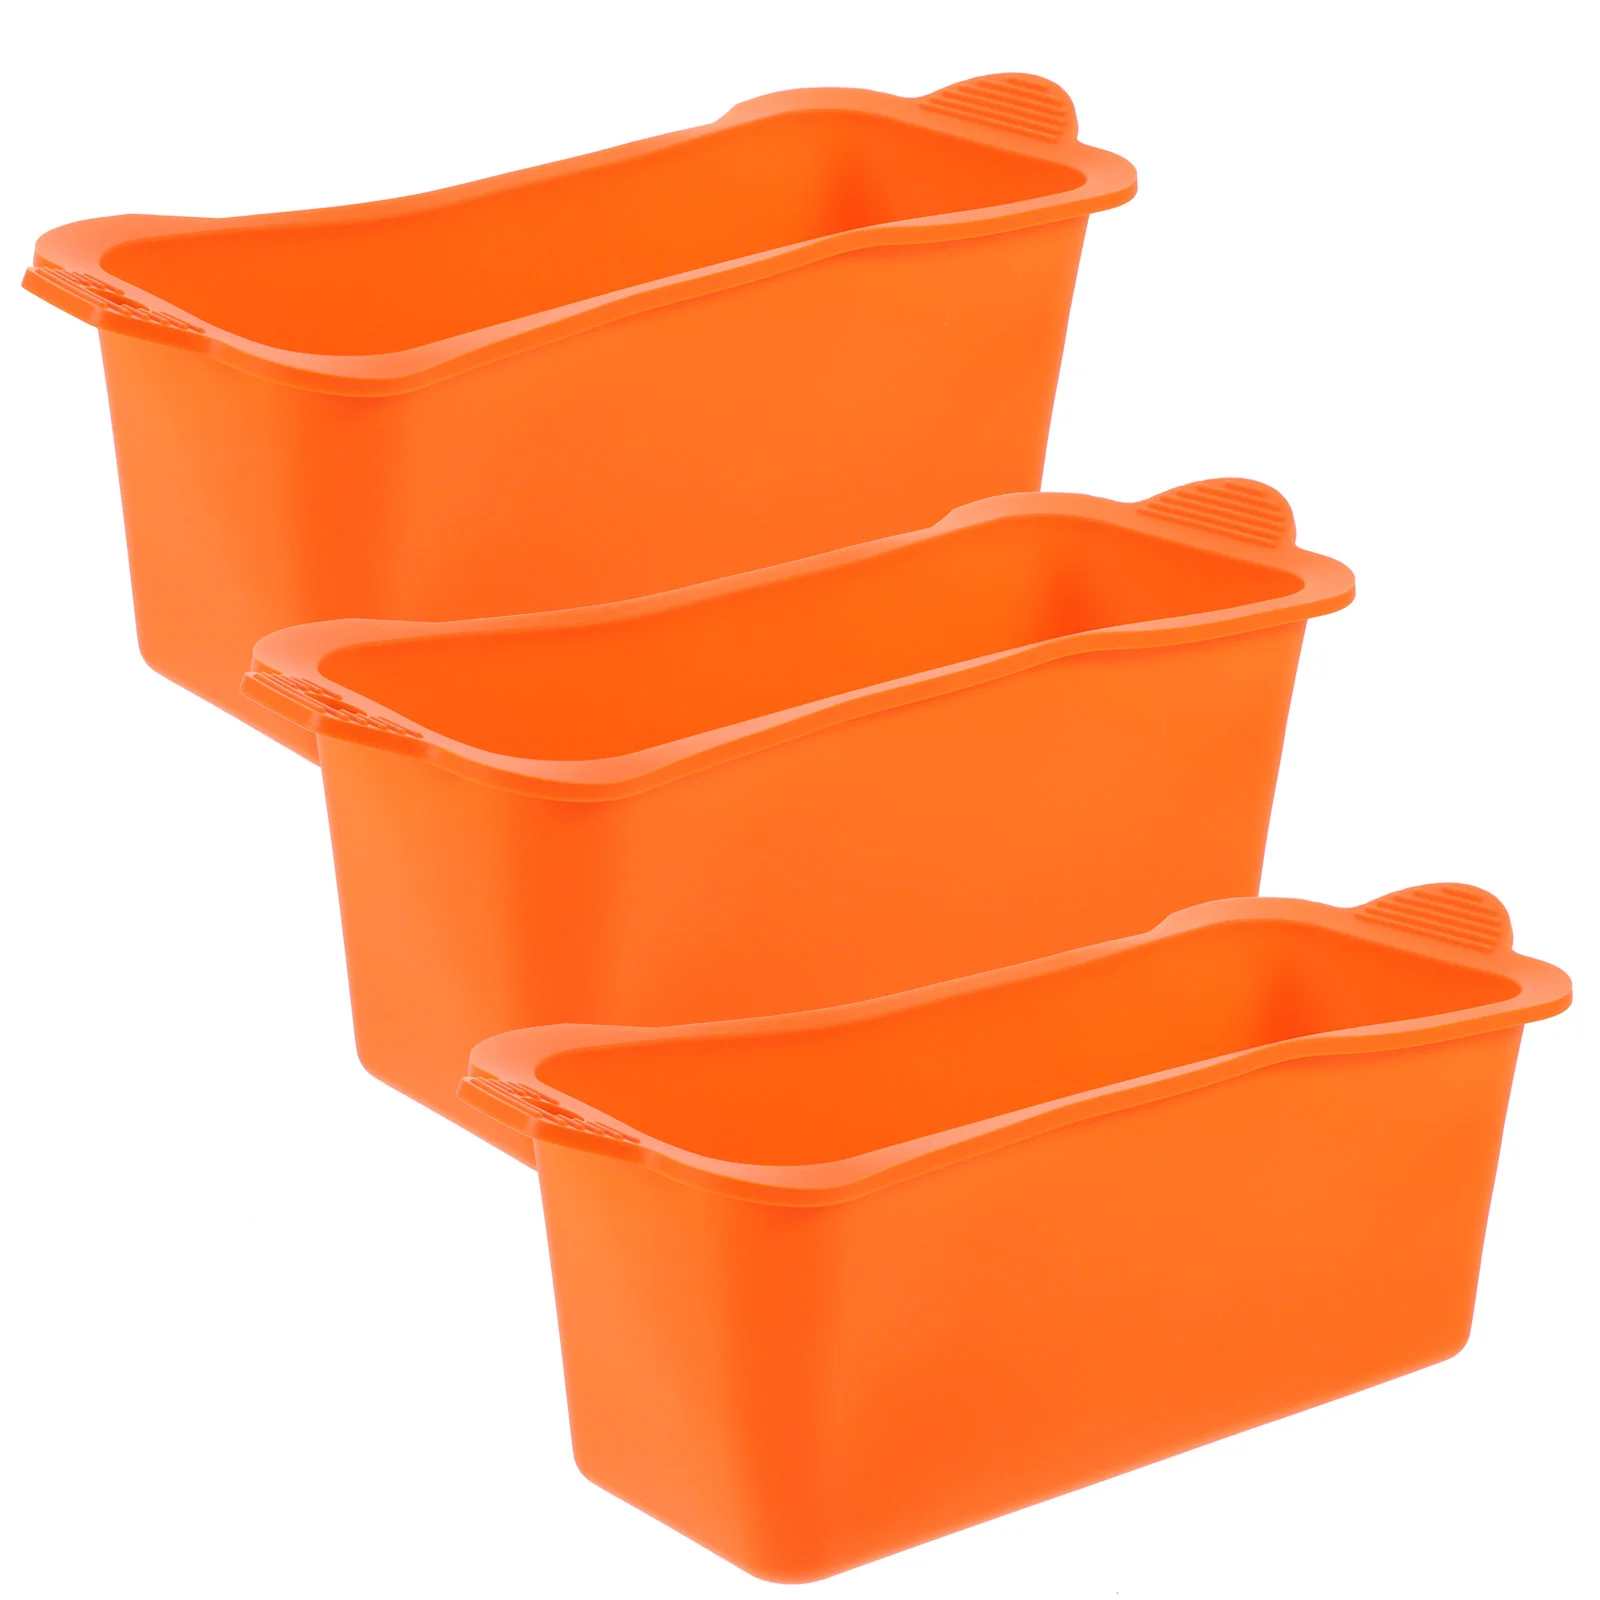 

3 Pcs Grease Cups Liner Silicone Replacement Outdoor Drip Pan Baking Dish Lining Camping Catcher Silica Gel Liners